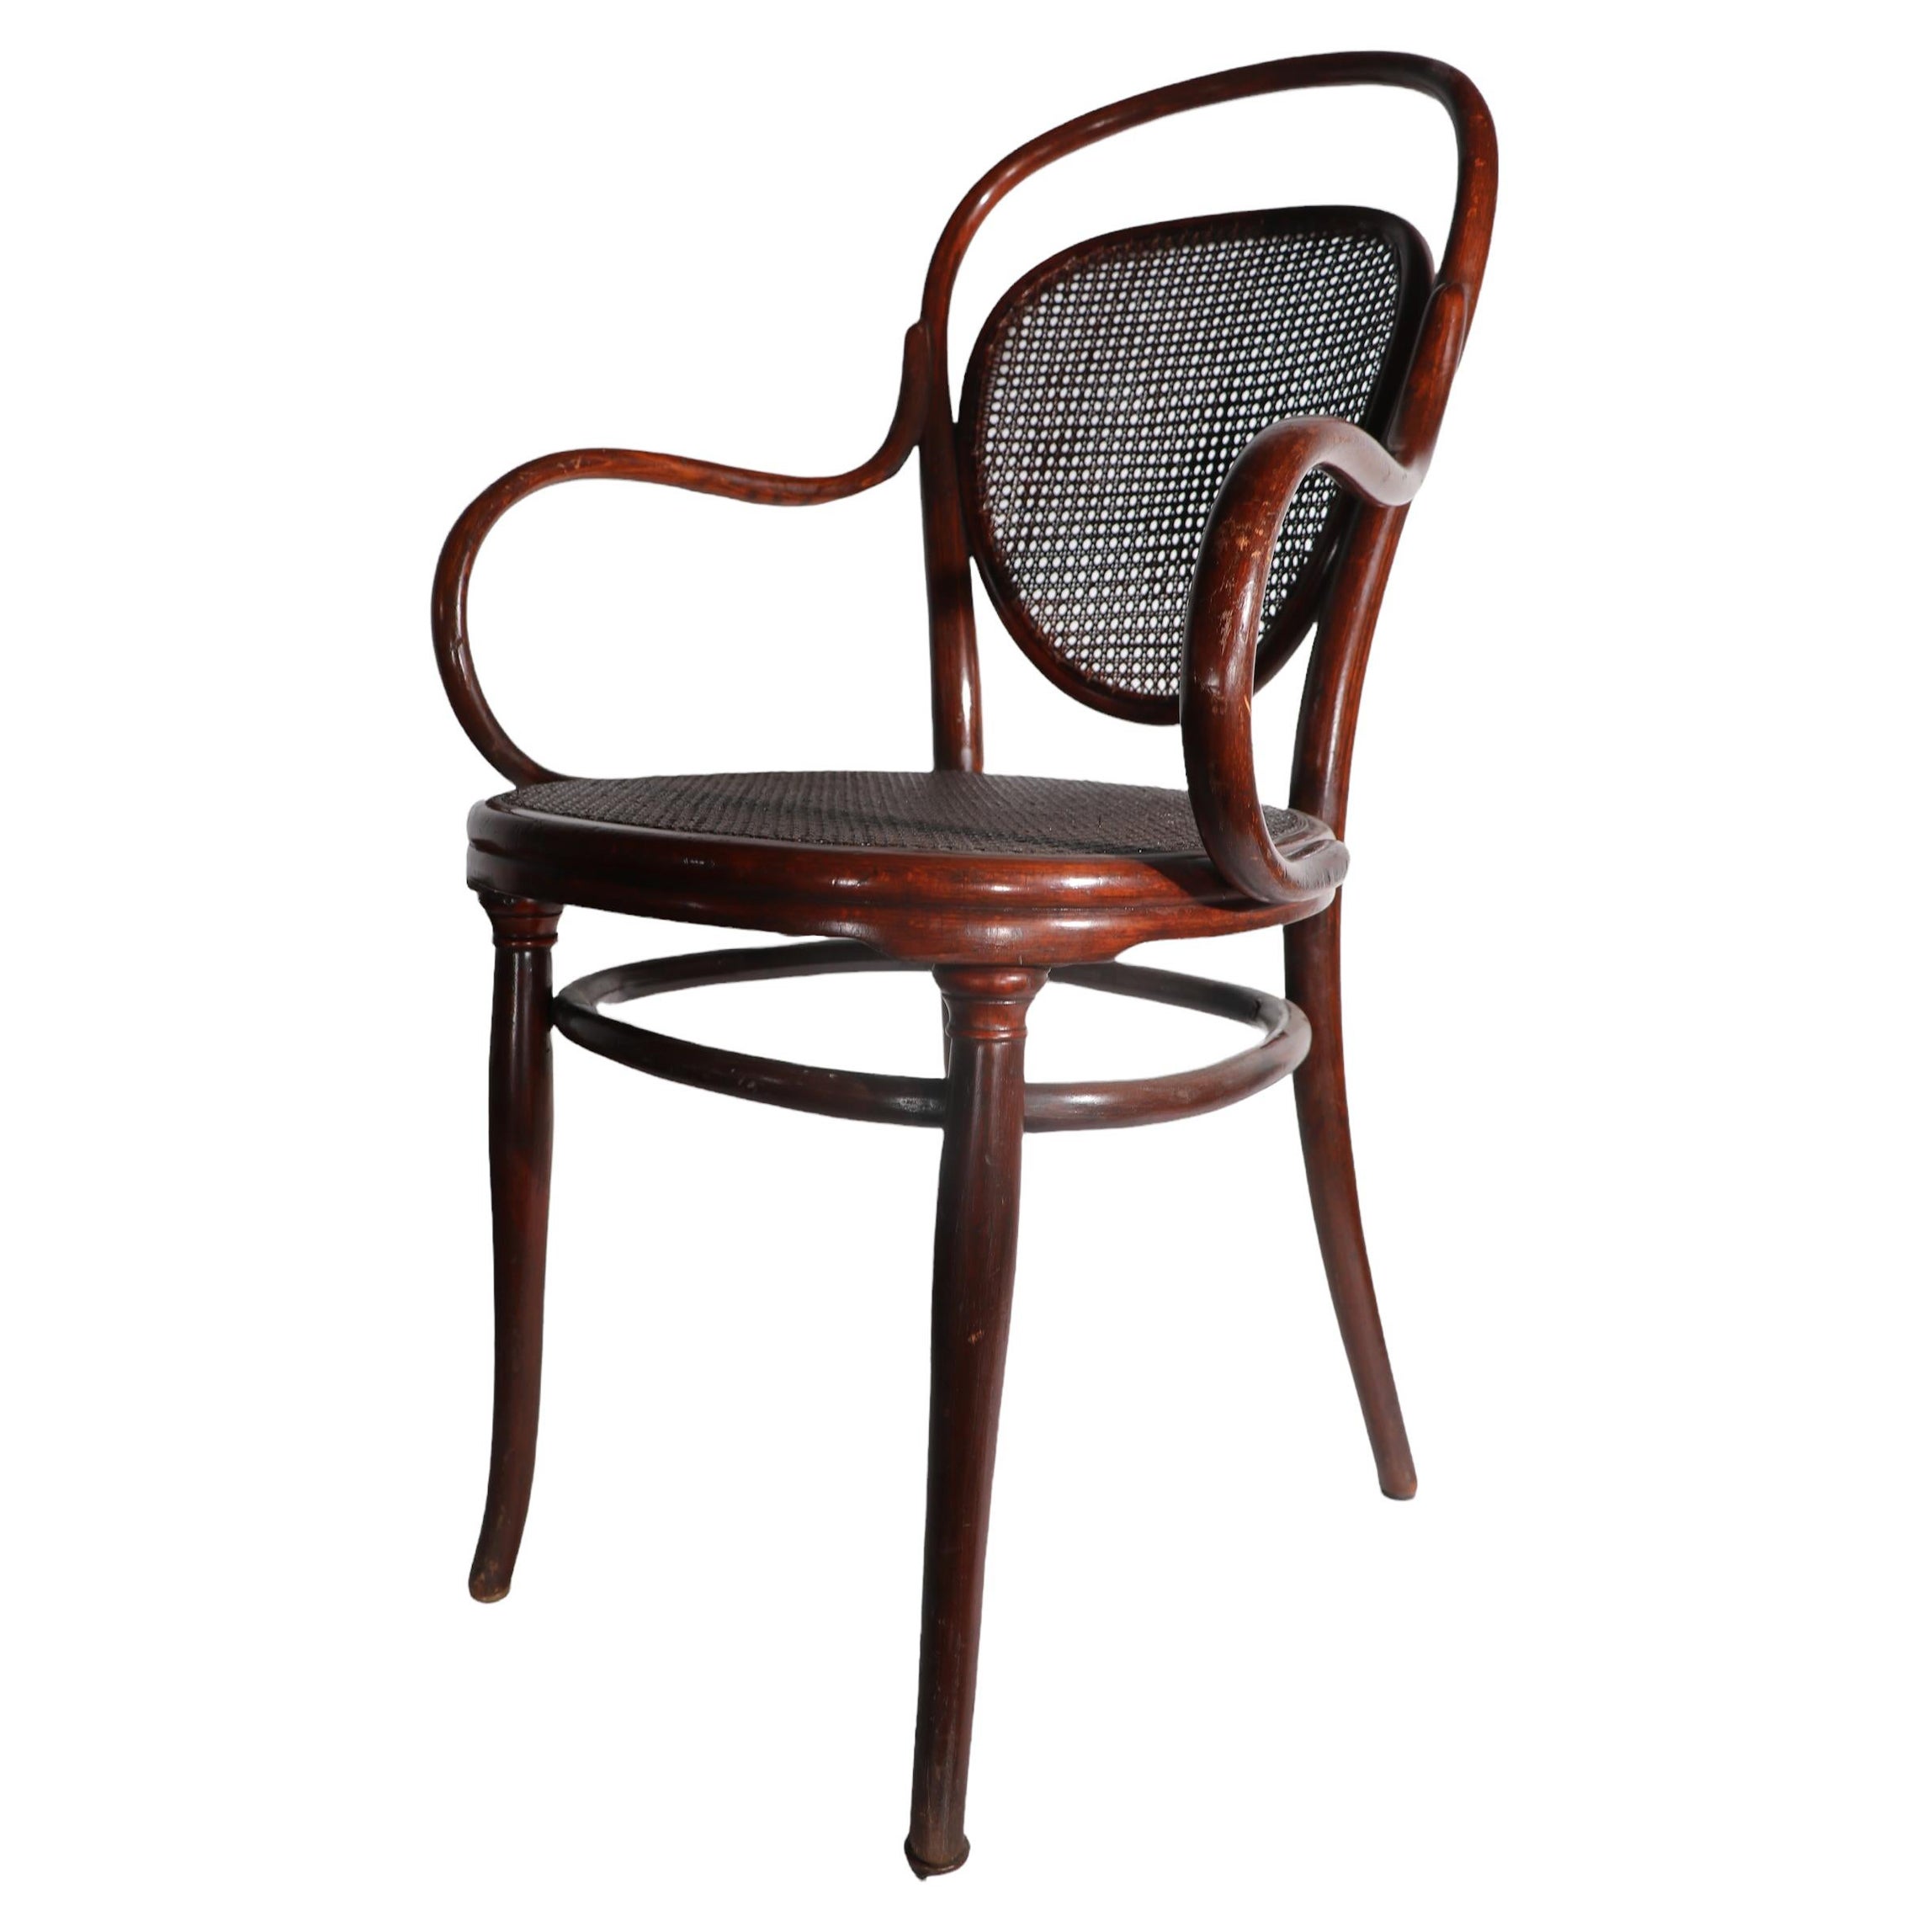 Vienna Secessionist Bentwood Arm Chair Att. to J & J Kohn in the Style of Thonet